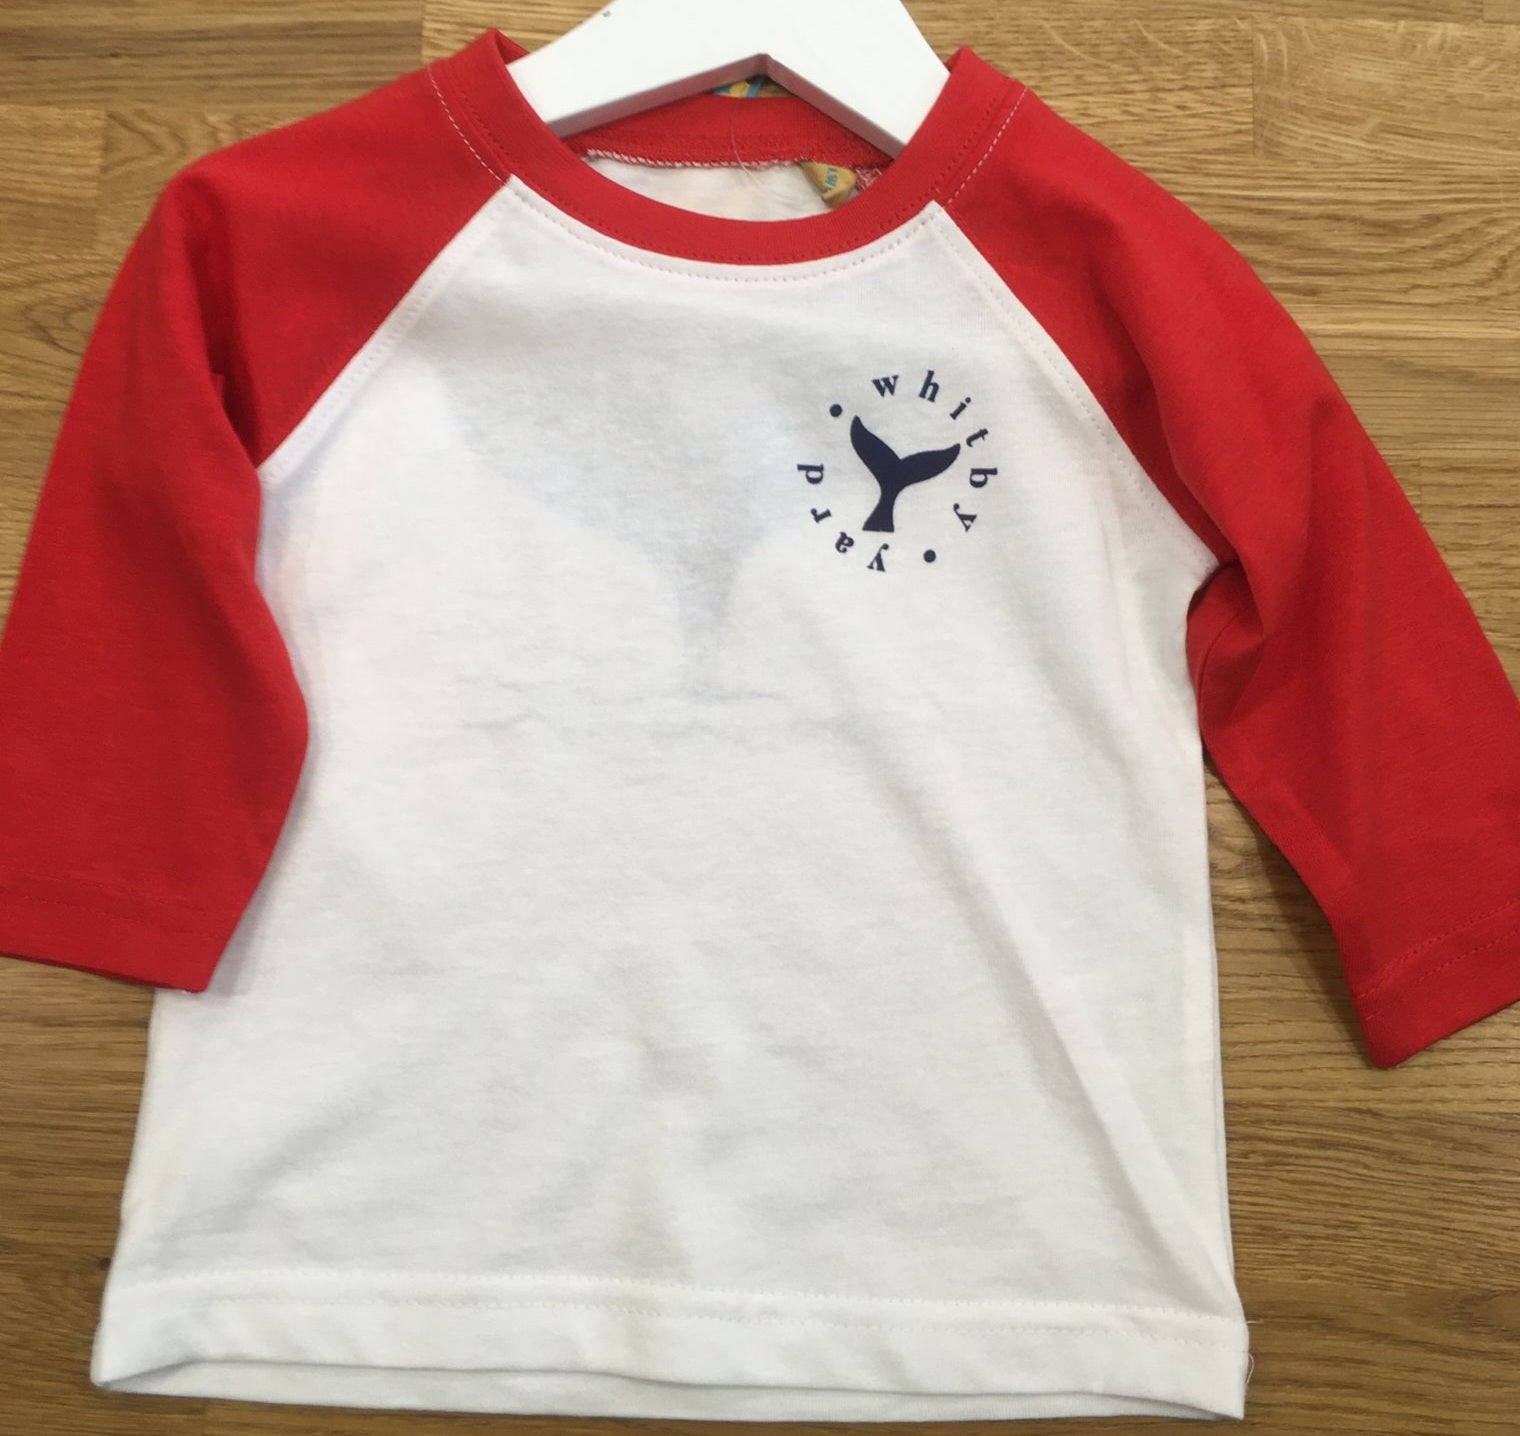 Baby Whale Tail T shirt - White & Red